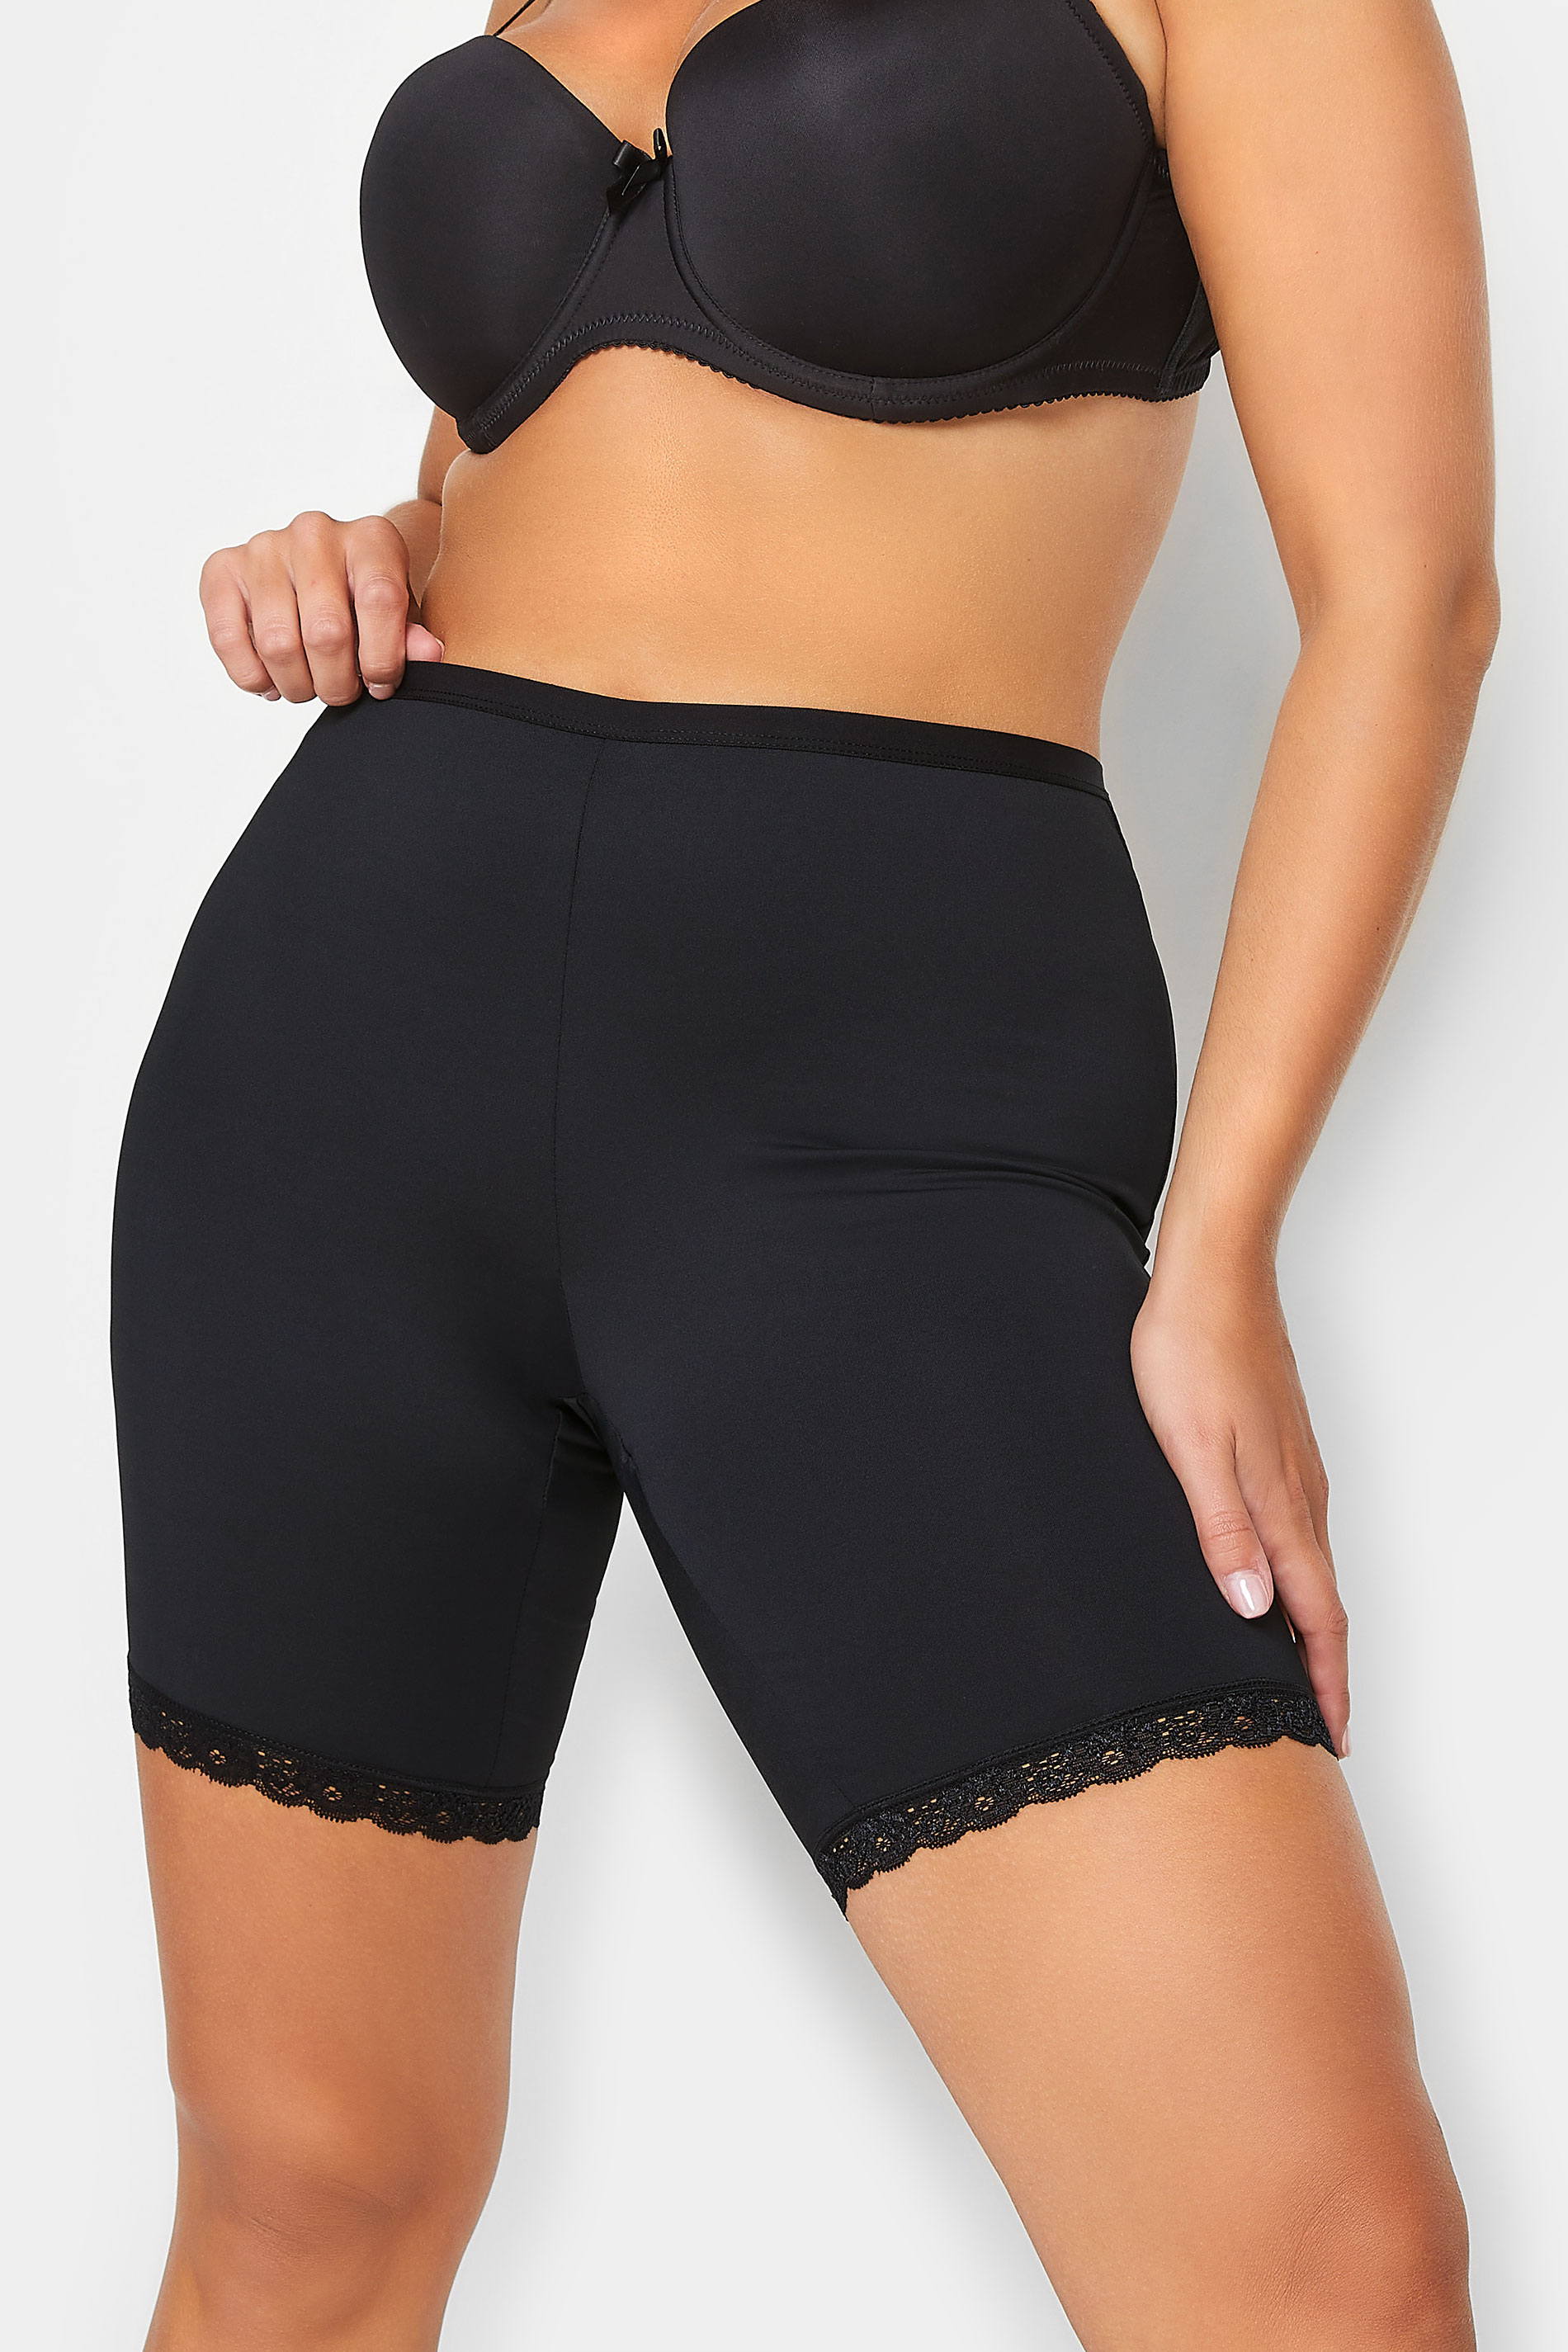 Black Lace Trim Anti Chafing High Waisted Shorts | Yours Clothing 1